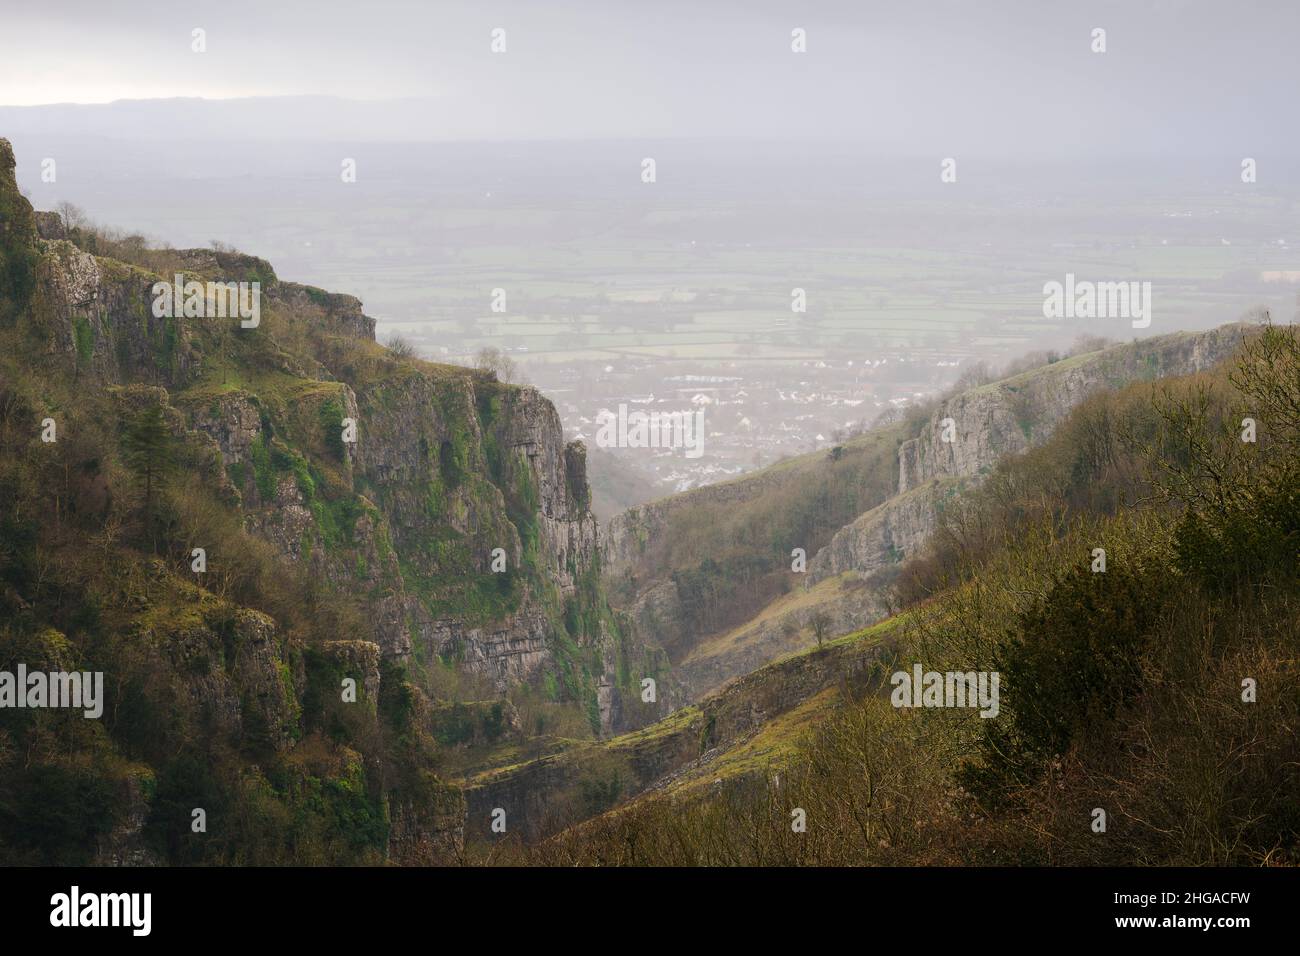 The limestone cliffs of Cheddar Gorge in the Mendip Hills with the village of Cheddar and Somerset Levels beyond during a rainstorm in winter, Somerset, England. Stock Photo